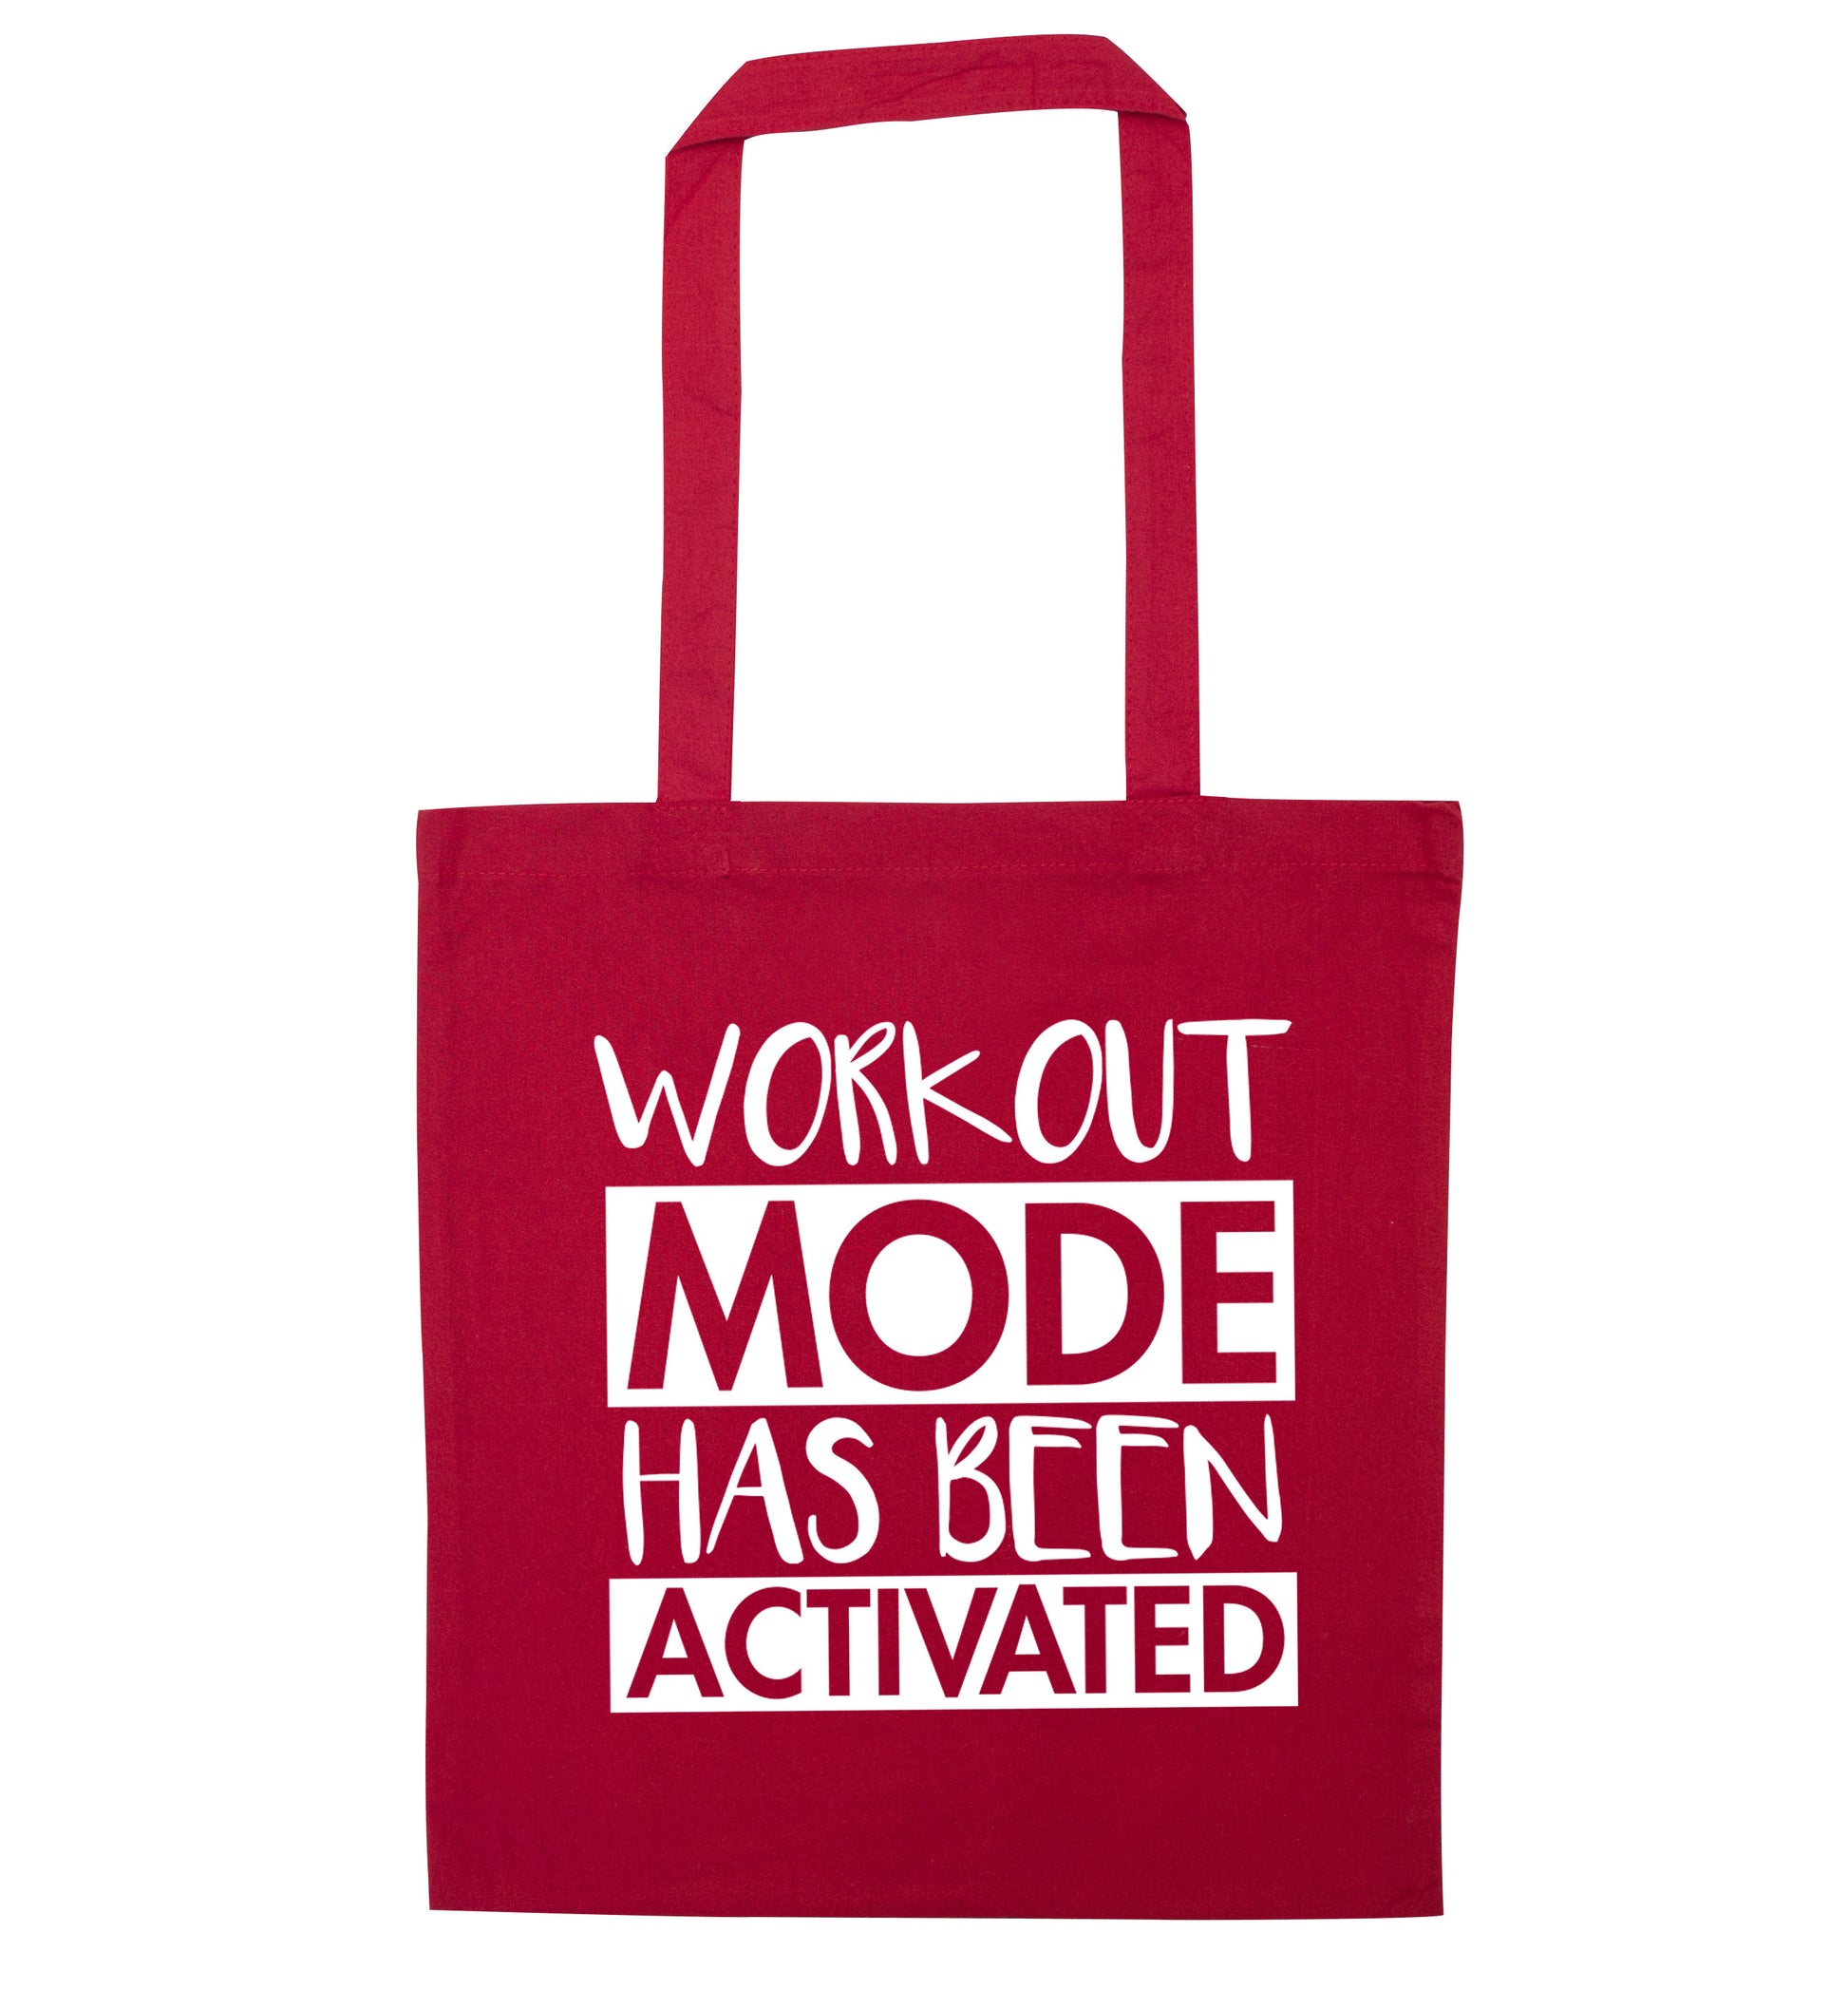 Workout mode has been activated red tote bag